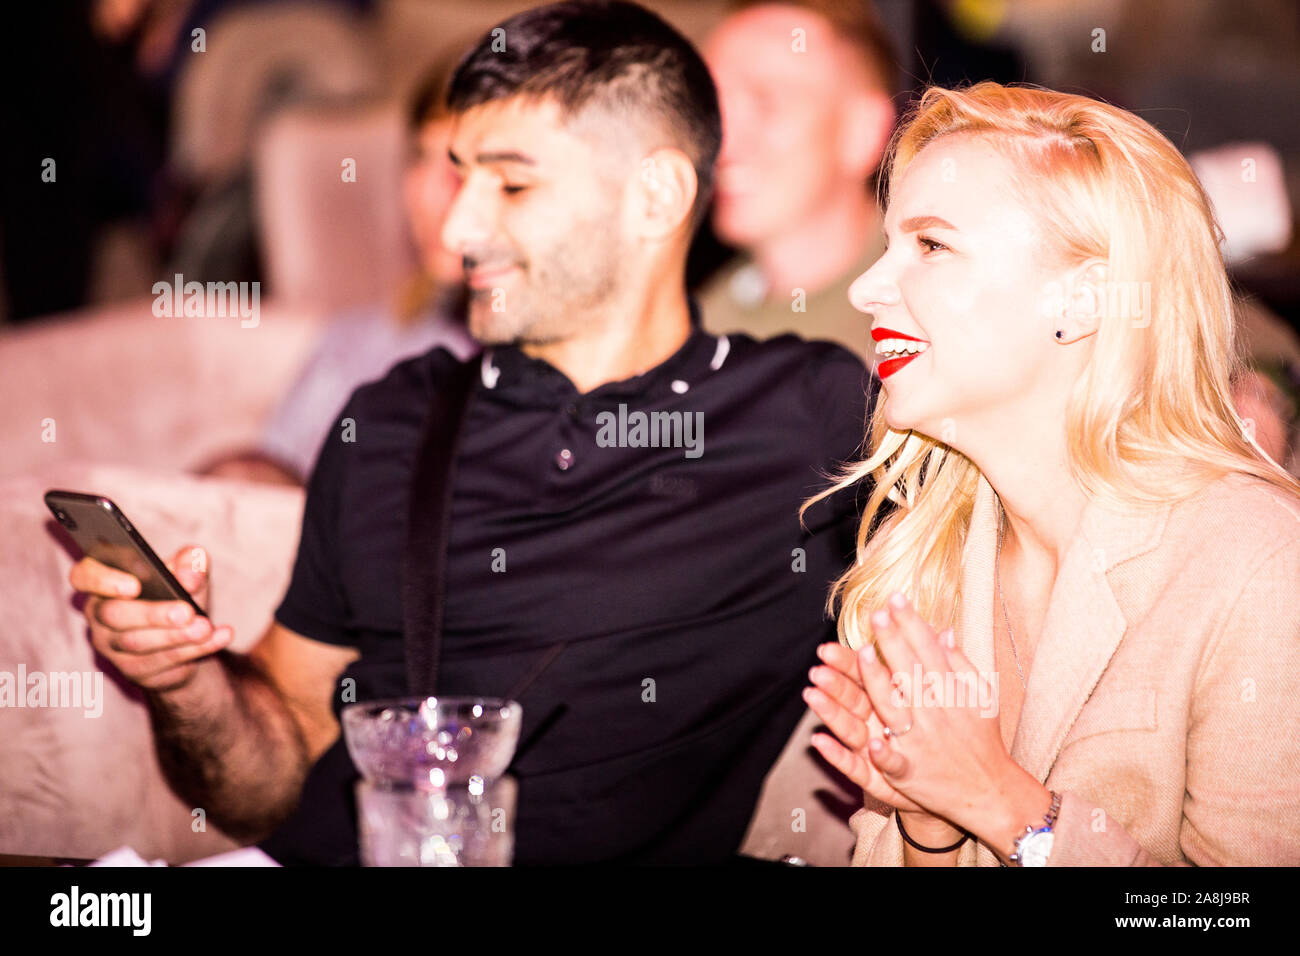 Junge dunkle Haare Mann und die blonde Frau genießen White Collar Boxing League amature Boxing Fight Night am ringside in Kiew Clubs. Stockfoto